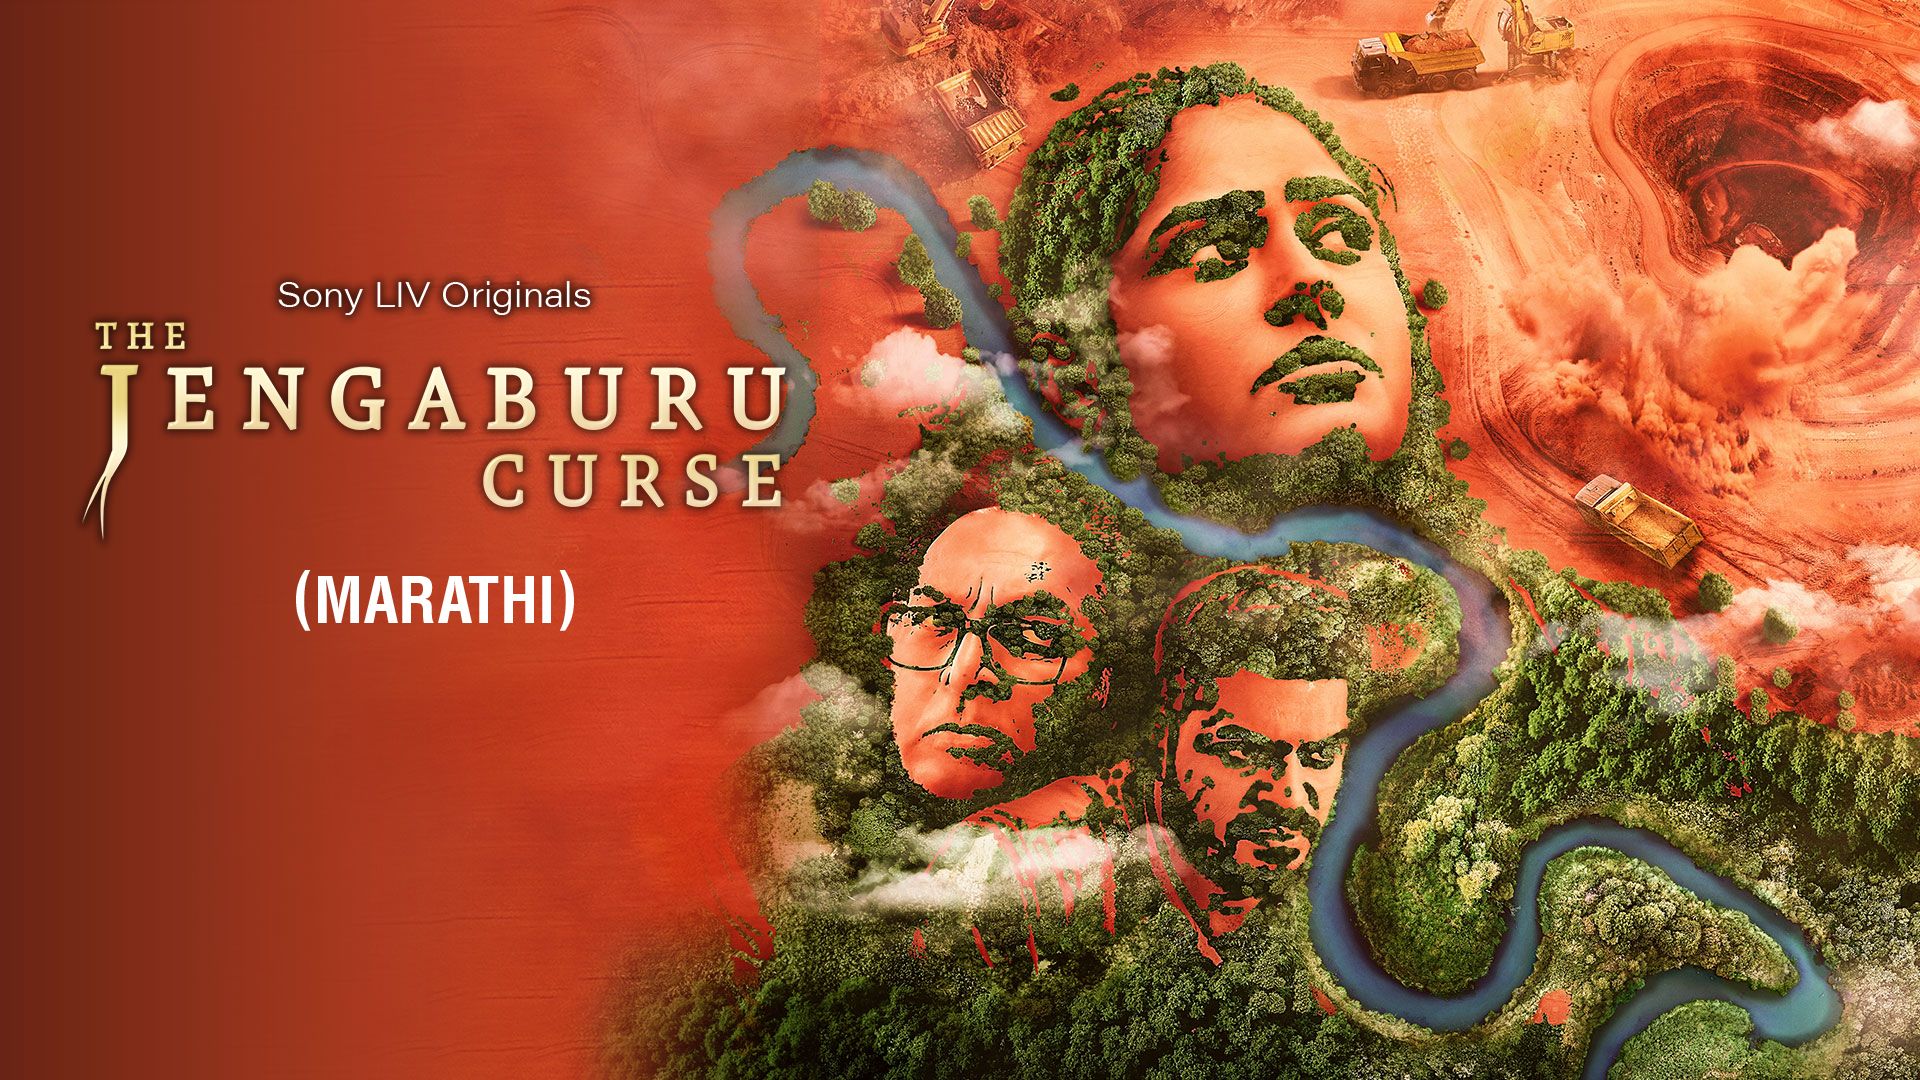 The Curse Season 1: The Curse Season 1: See release schedule, storyline,  number of episodes, where to watch and more - The Economic Times